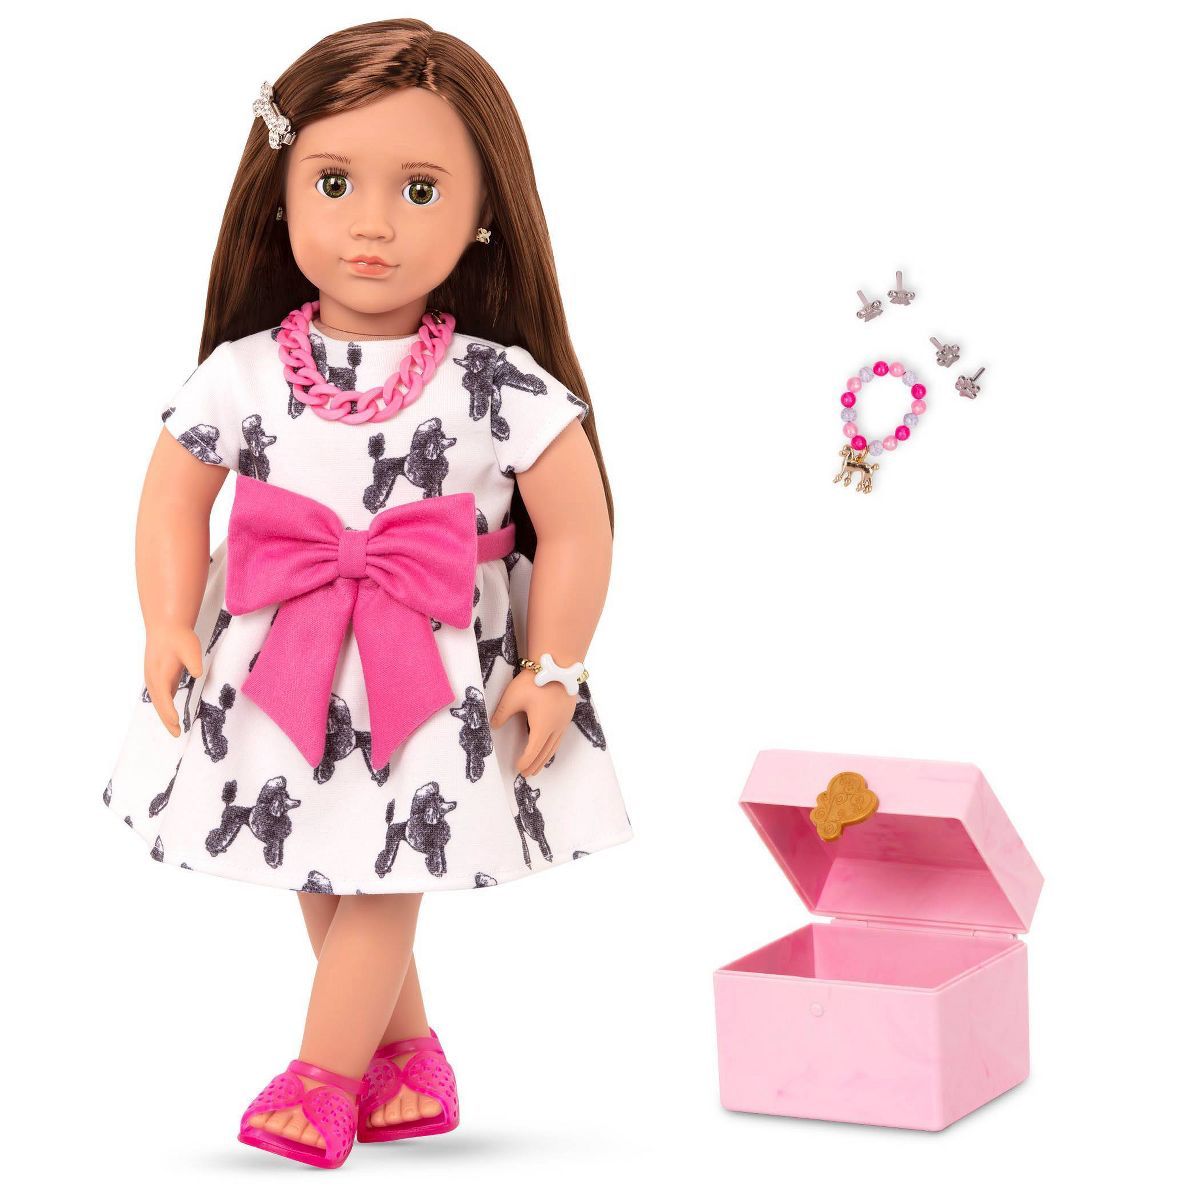 Our Generation 18" Doll with Jewelry Box & Pierced Ears - Nancy | Target